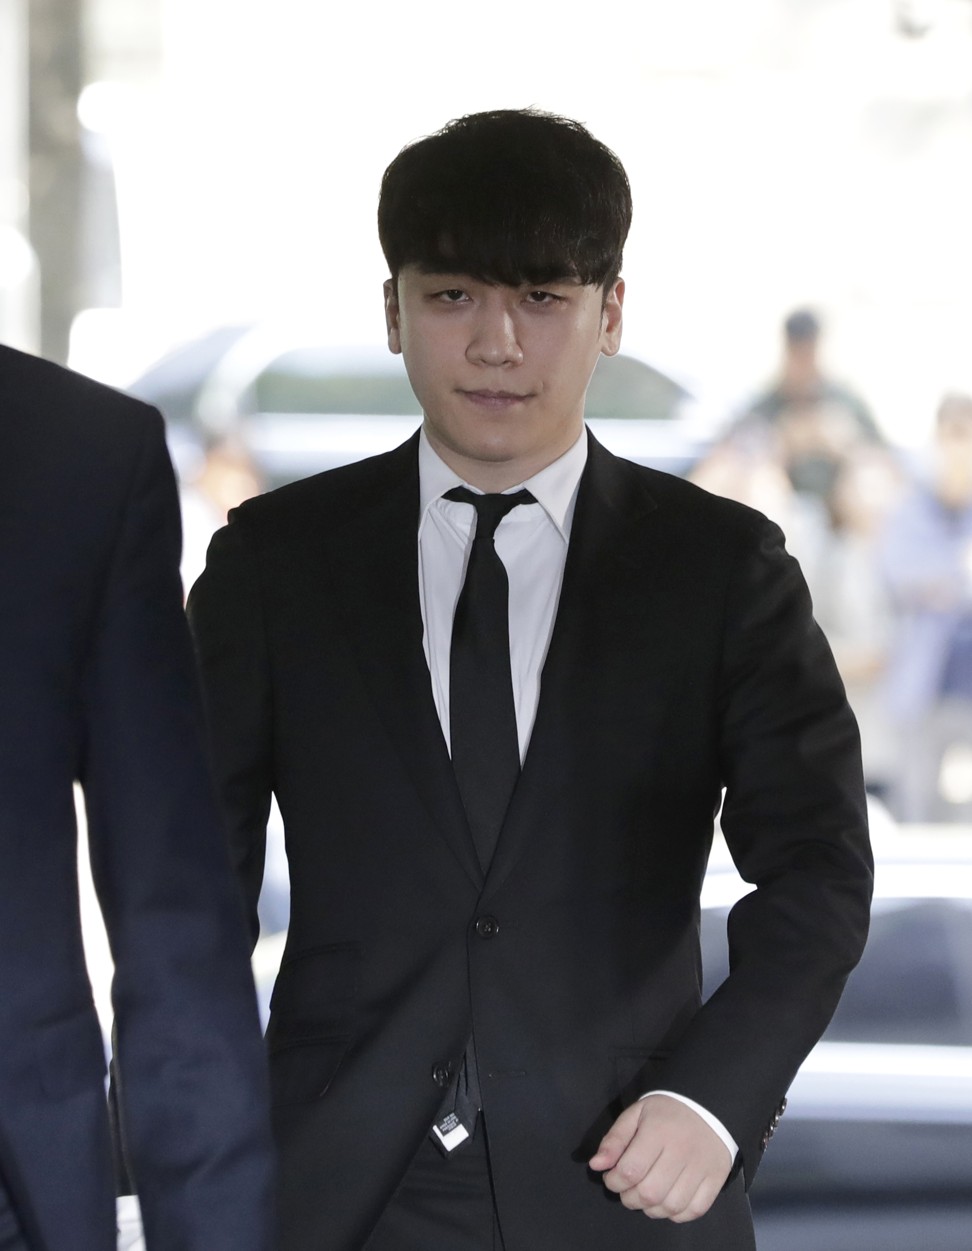 Seungri arrives for a hearing at the Seoul Central District Court in Seoul, South Korea in 2019. Photo: Lee Jin-man/AP